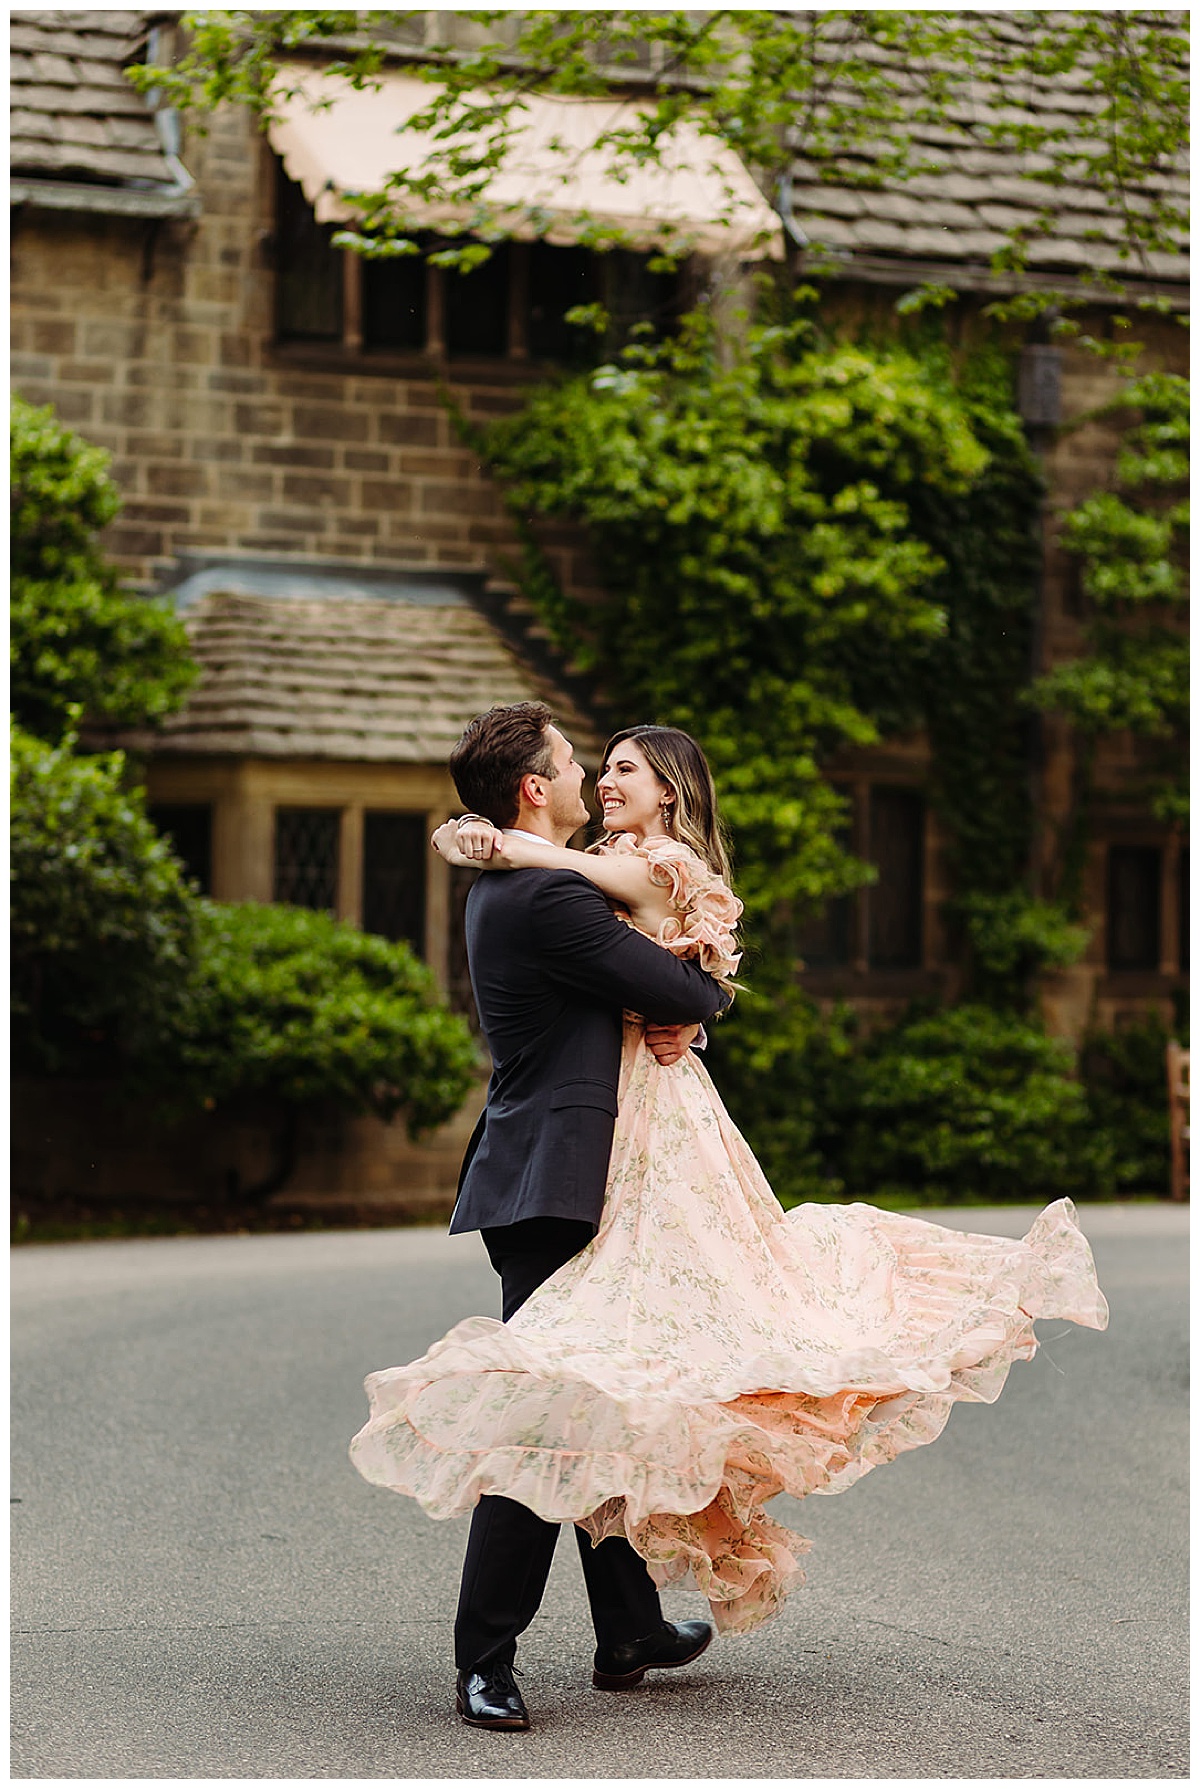 Couple spin and dance together at Edsel & Eleanor Ford Estate